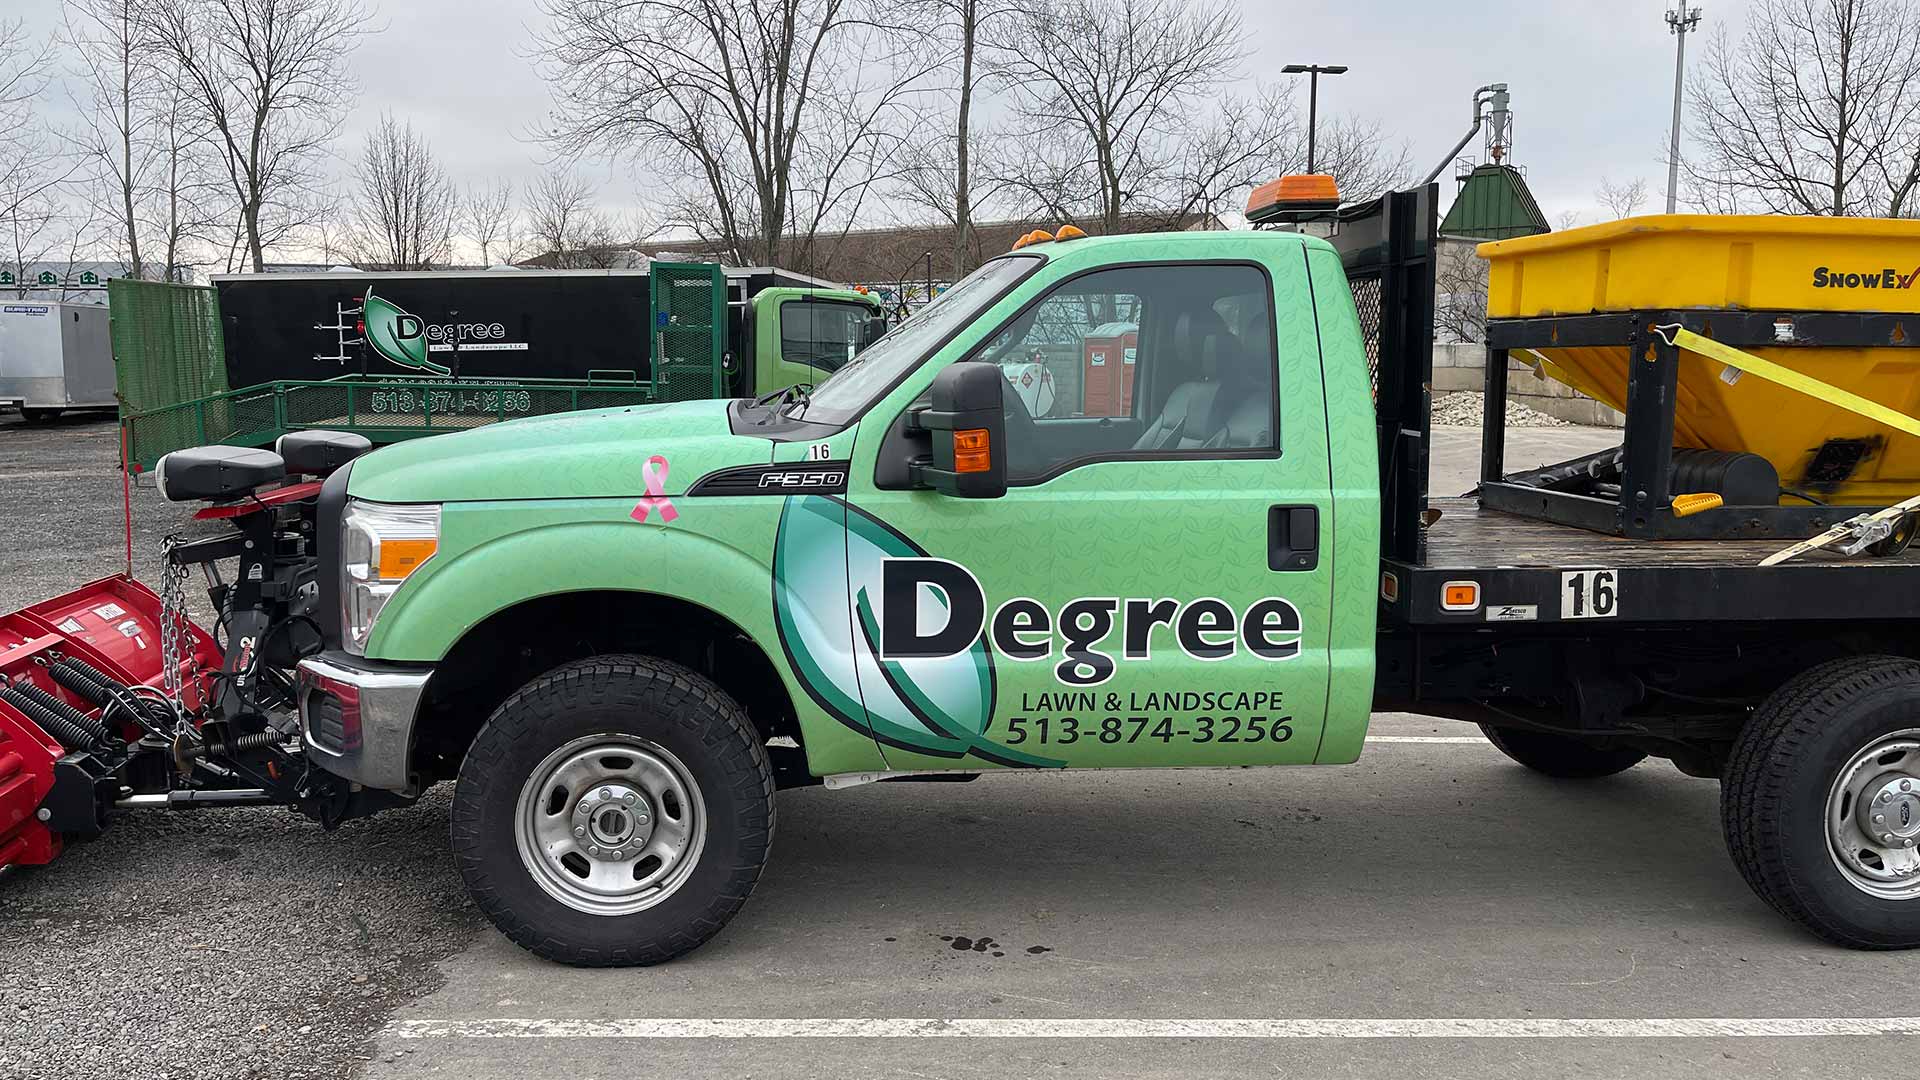 What is Degree Lawn & Landscape All About?